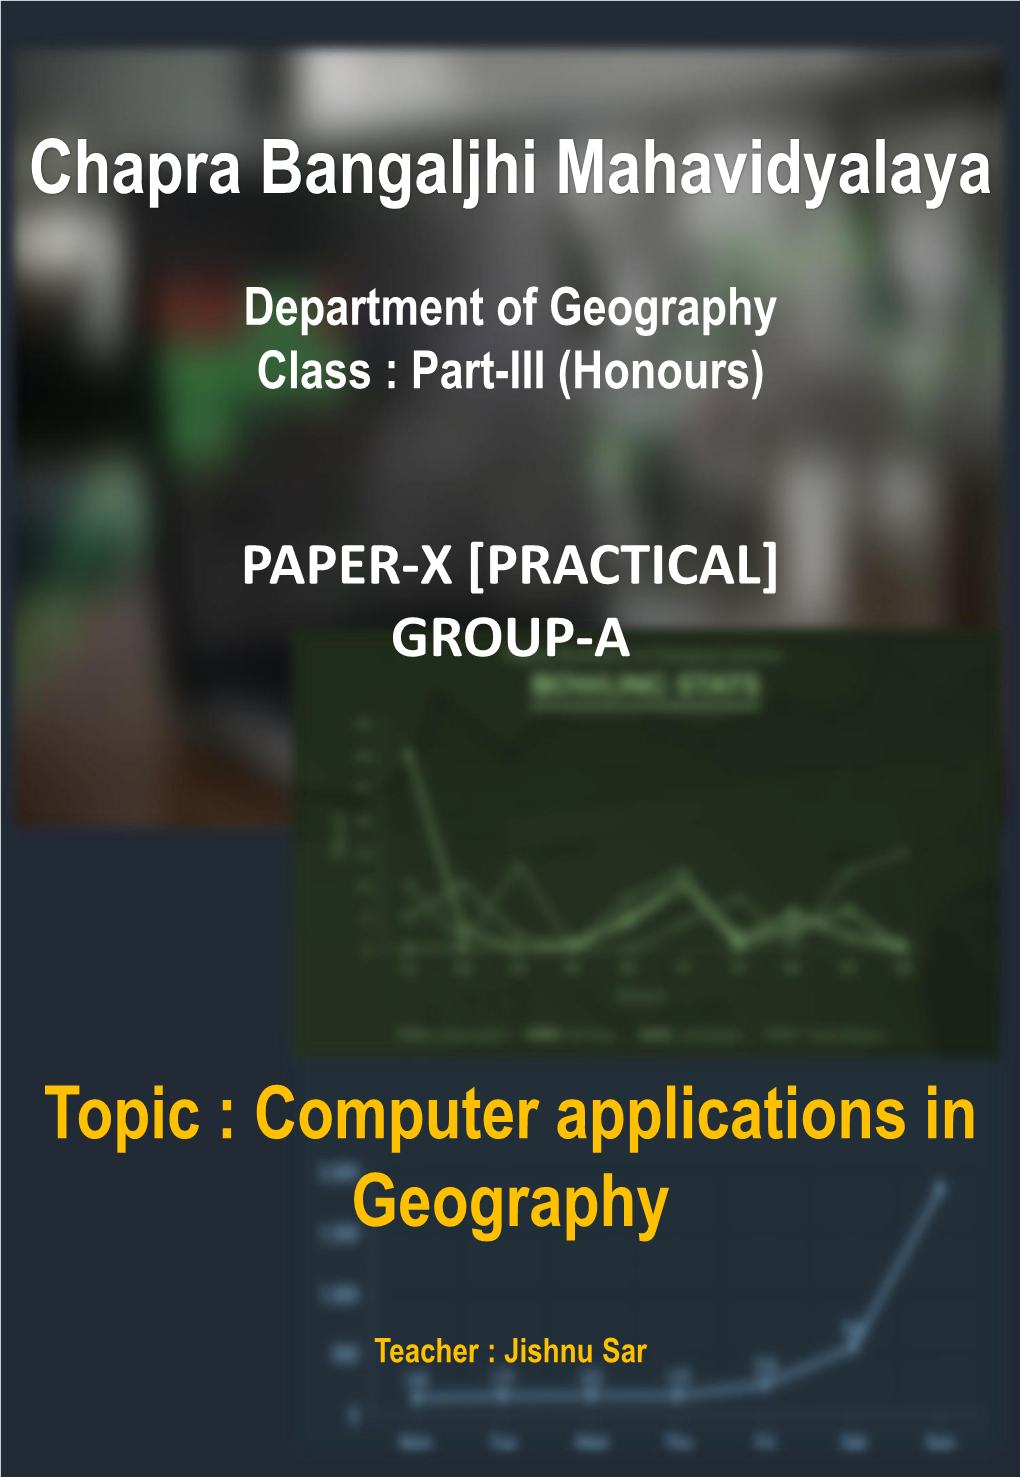 Department of Geography Class : Part-III (Honours)